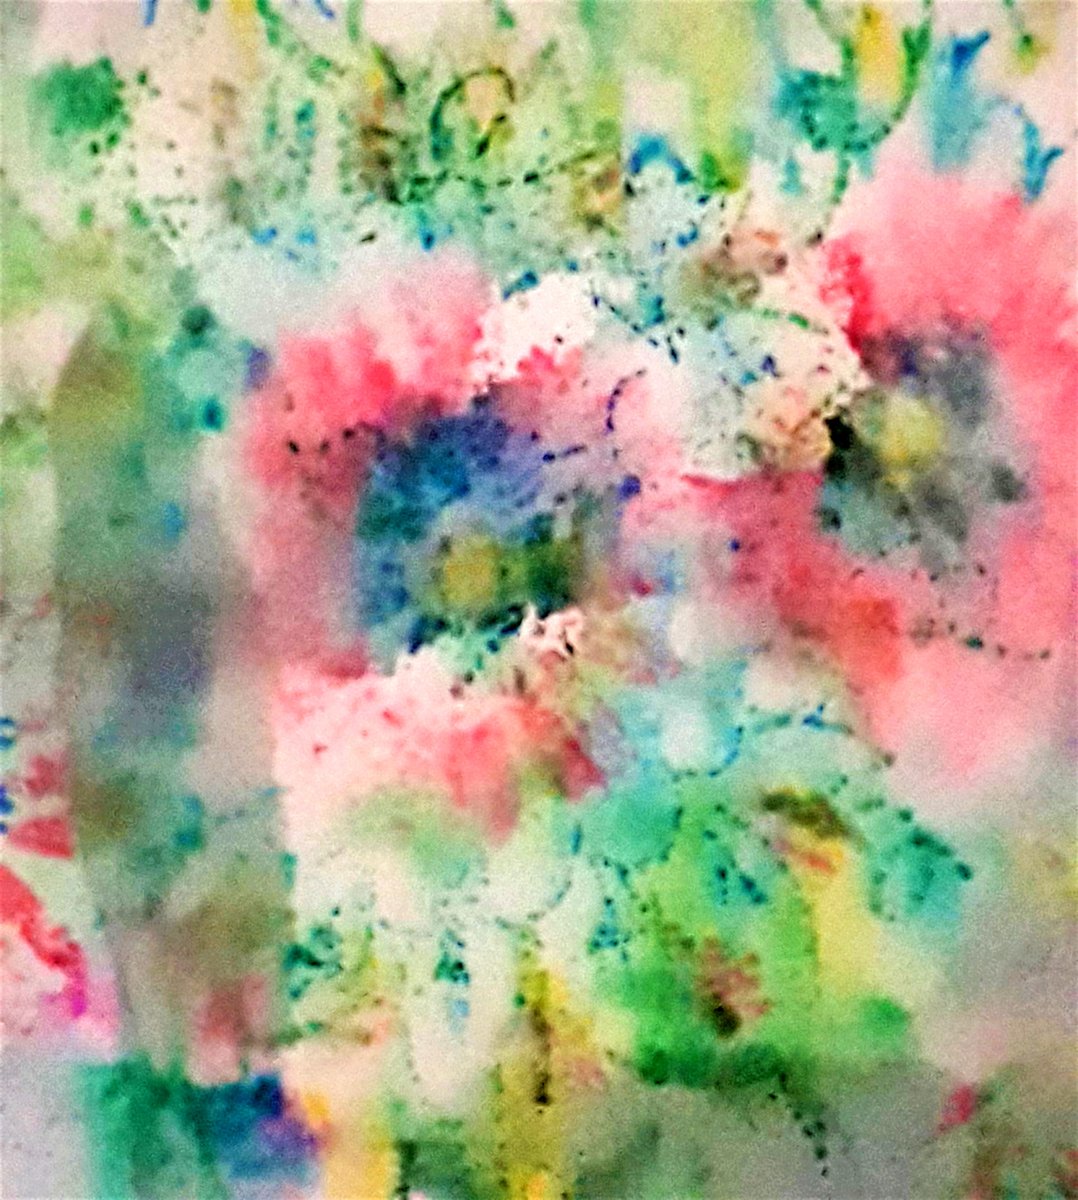 Abstract Painting with felt-tip pens – Who knew?! We love this technique and its easy to make at home with basic craft supplies too! Learn how in this week’s activity: ragm.co.uk/artforall #artforall #Expressart @BennPartnershipCentre